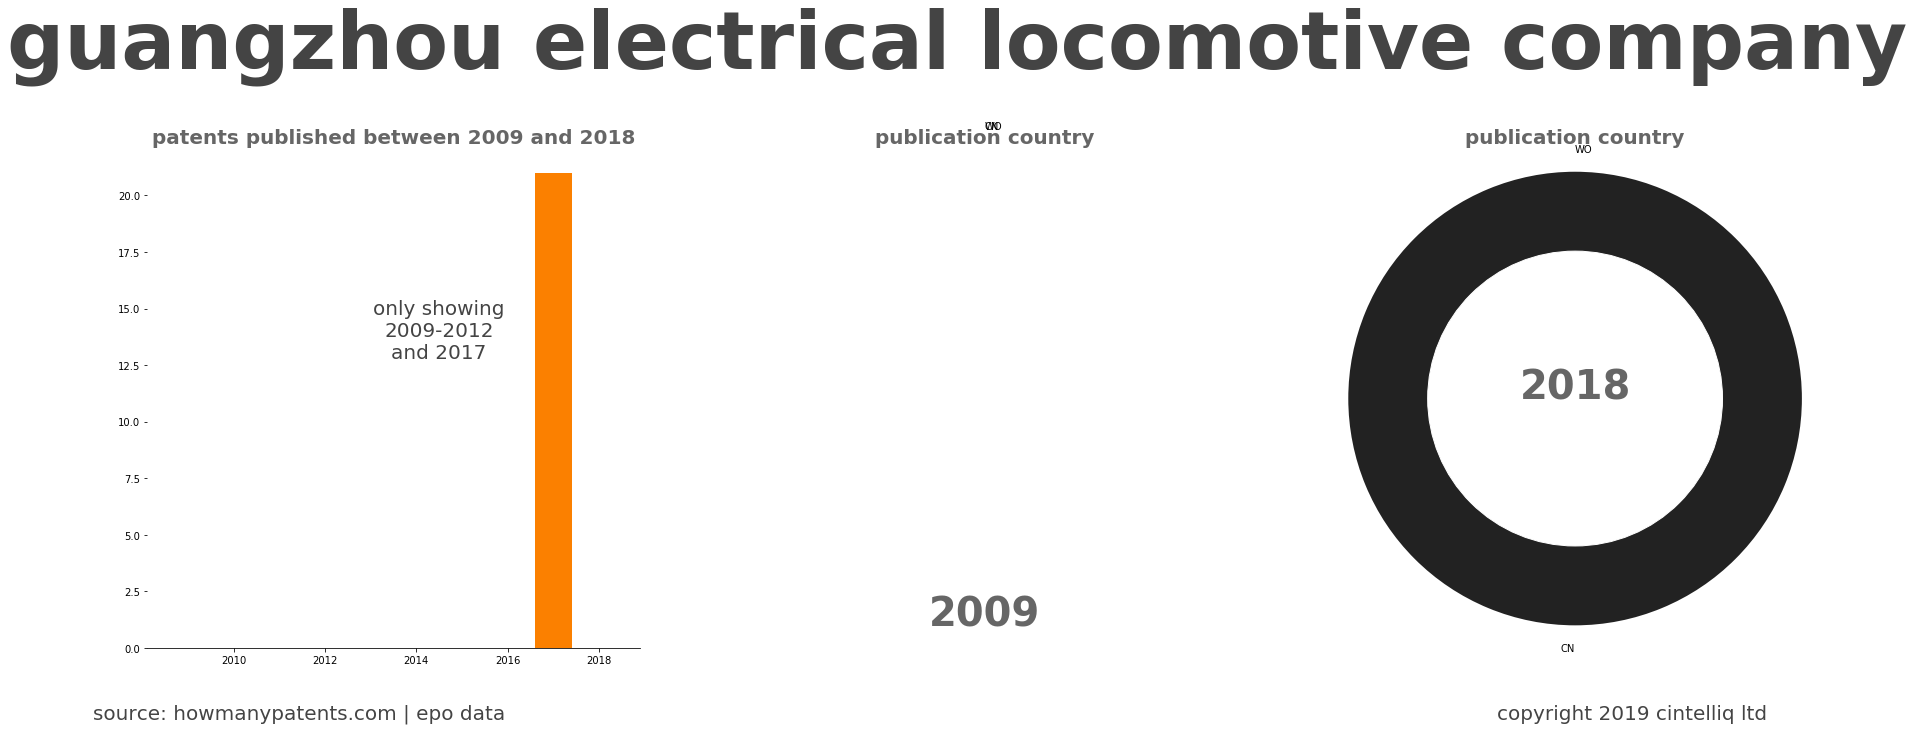 summary of patents for Guangzhou Electrical Locomotive Company